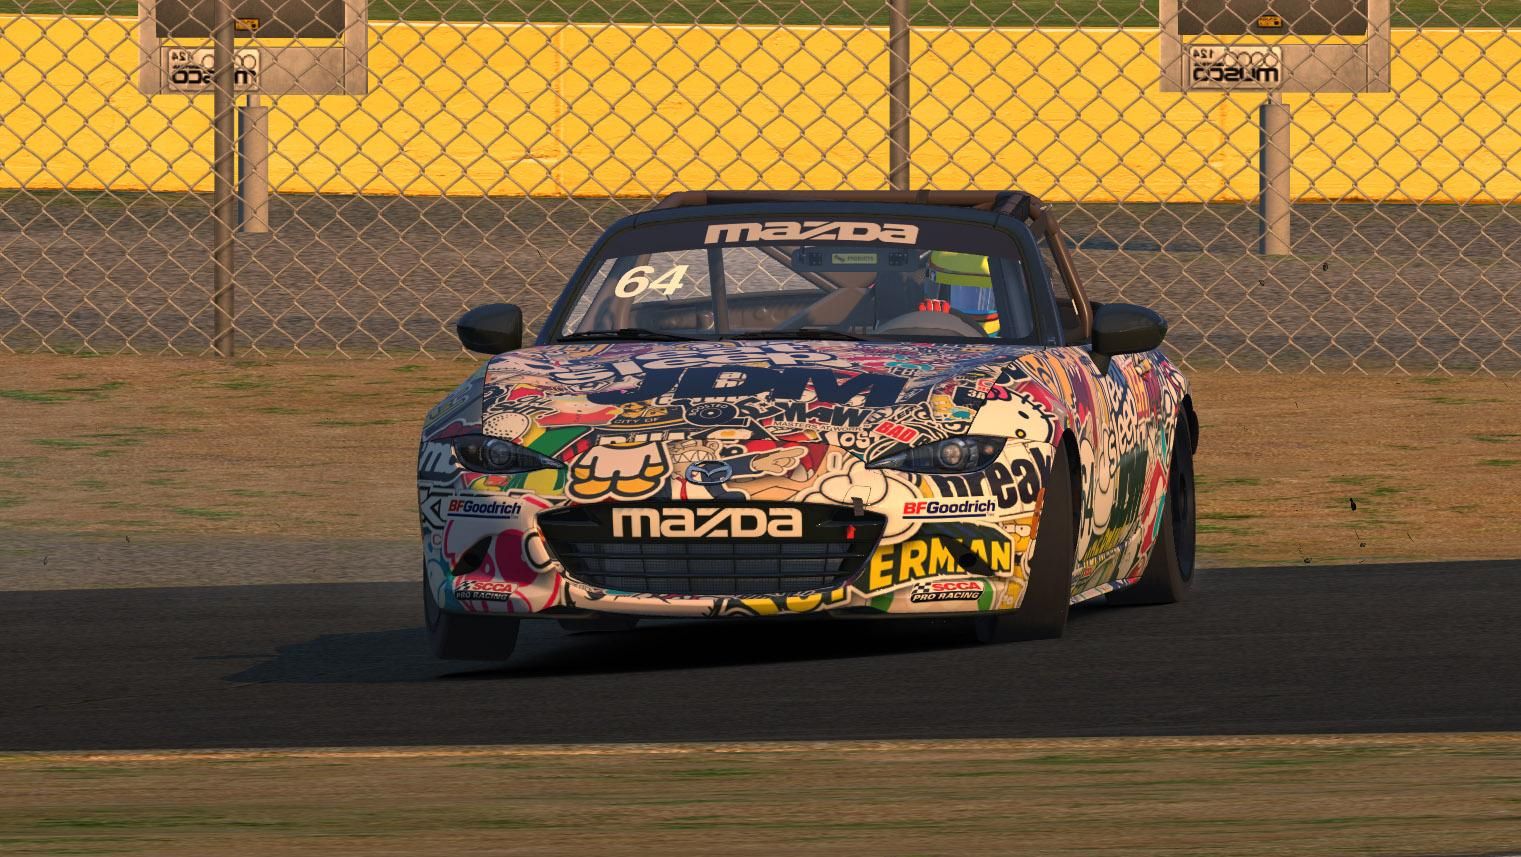 sticker bombed car on racetrack